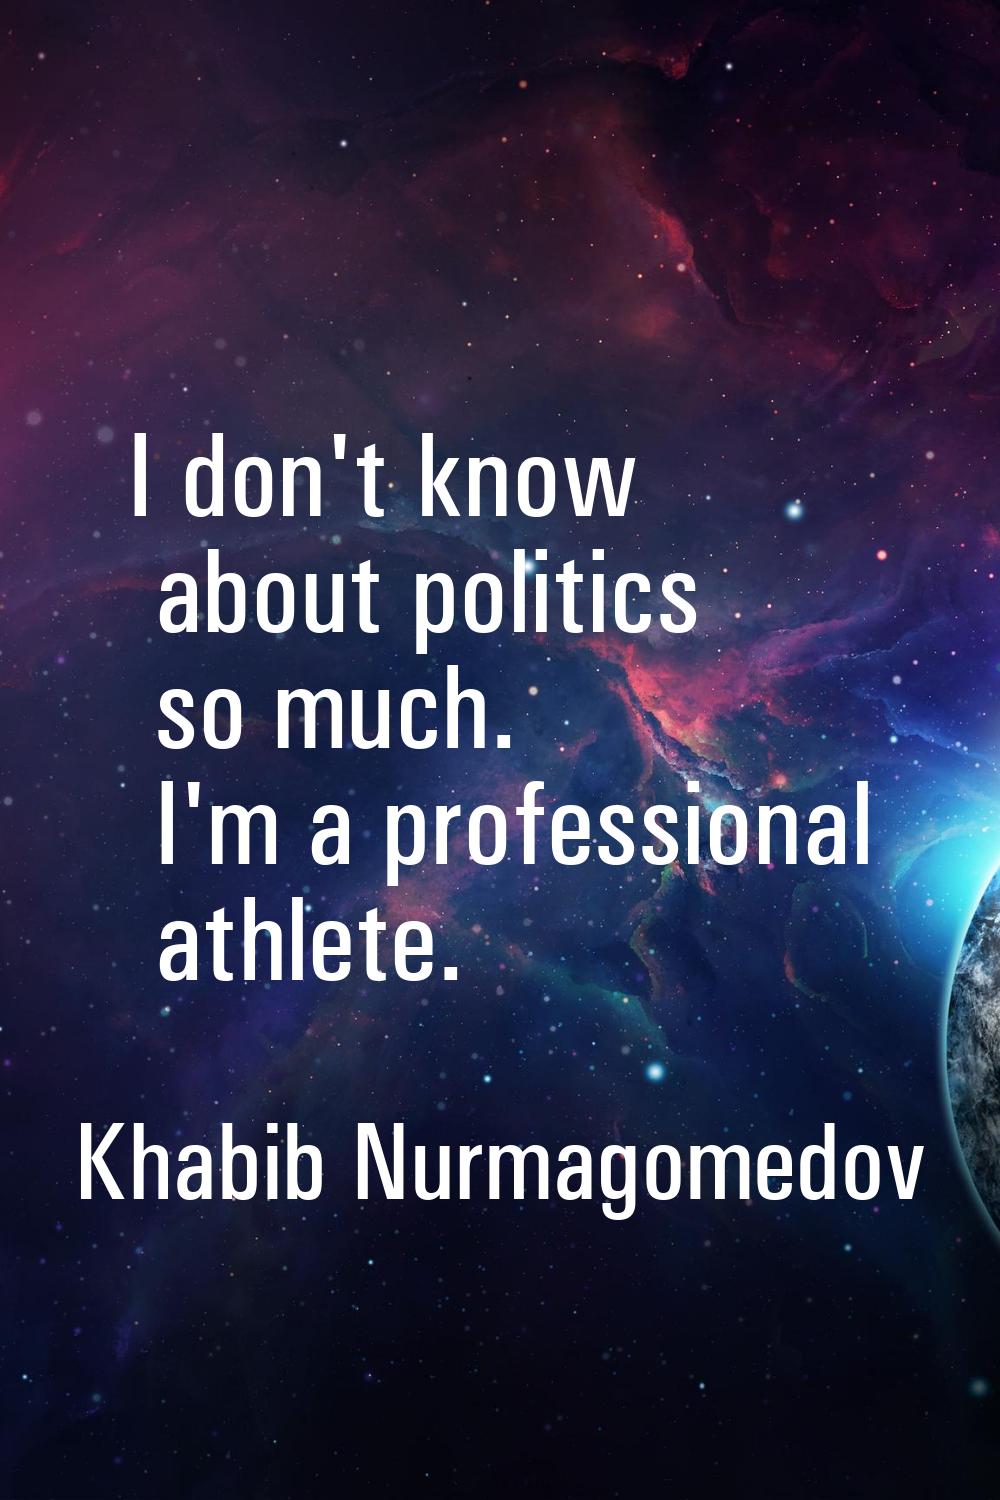 I don't know about politics so much. I'm a professional athlete.